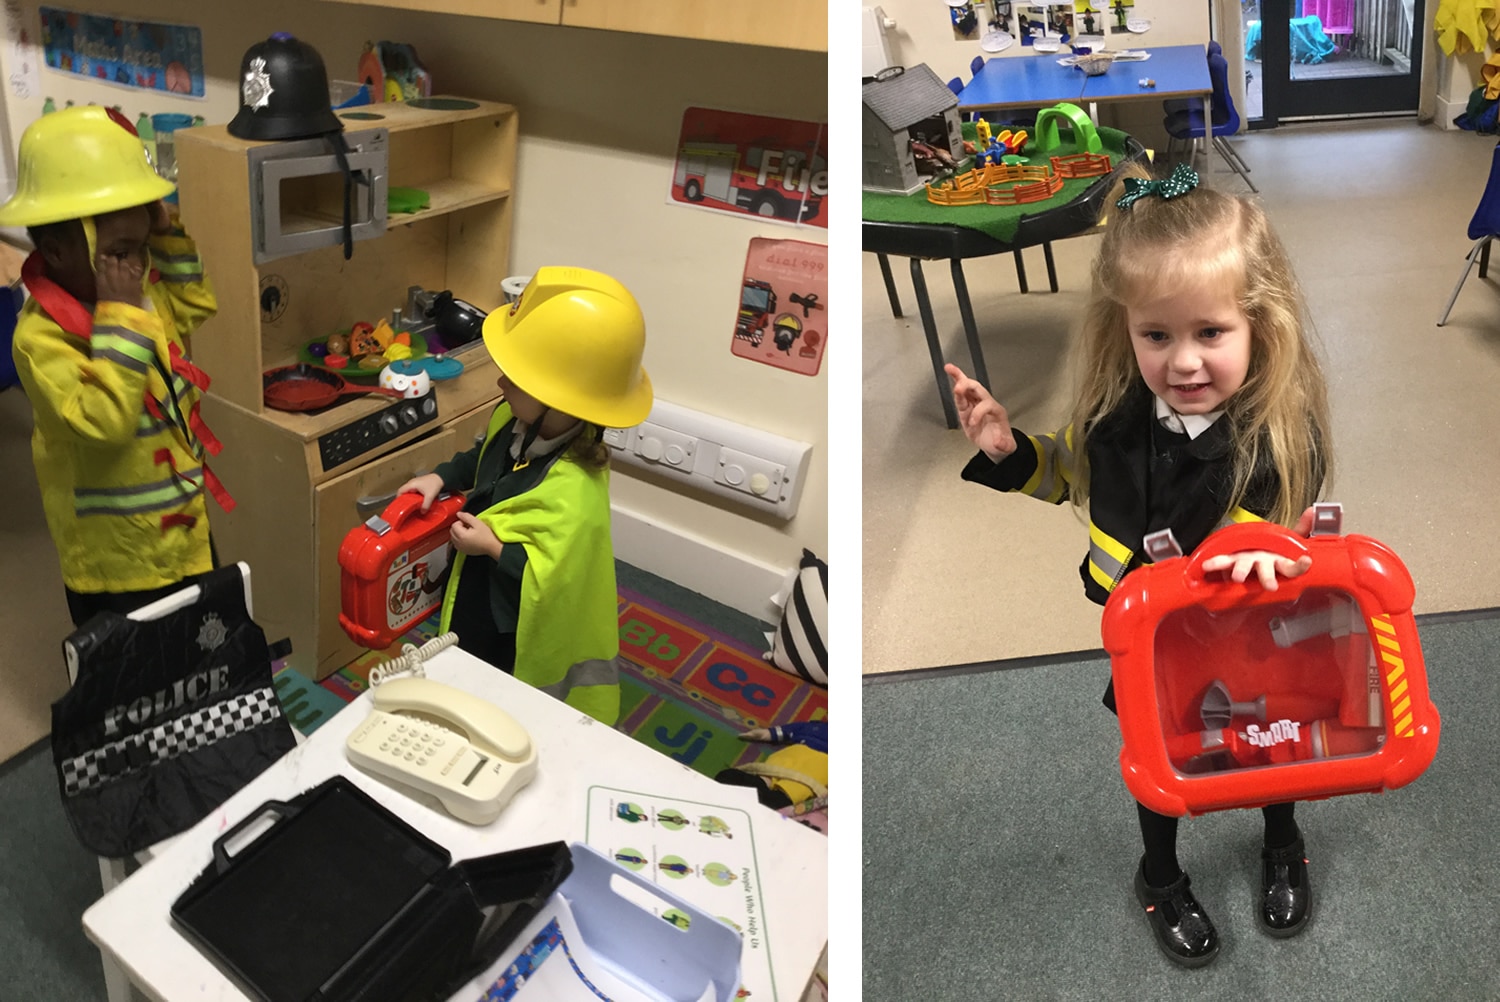 Fire Station role play